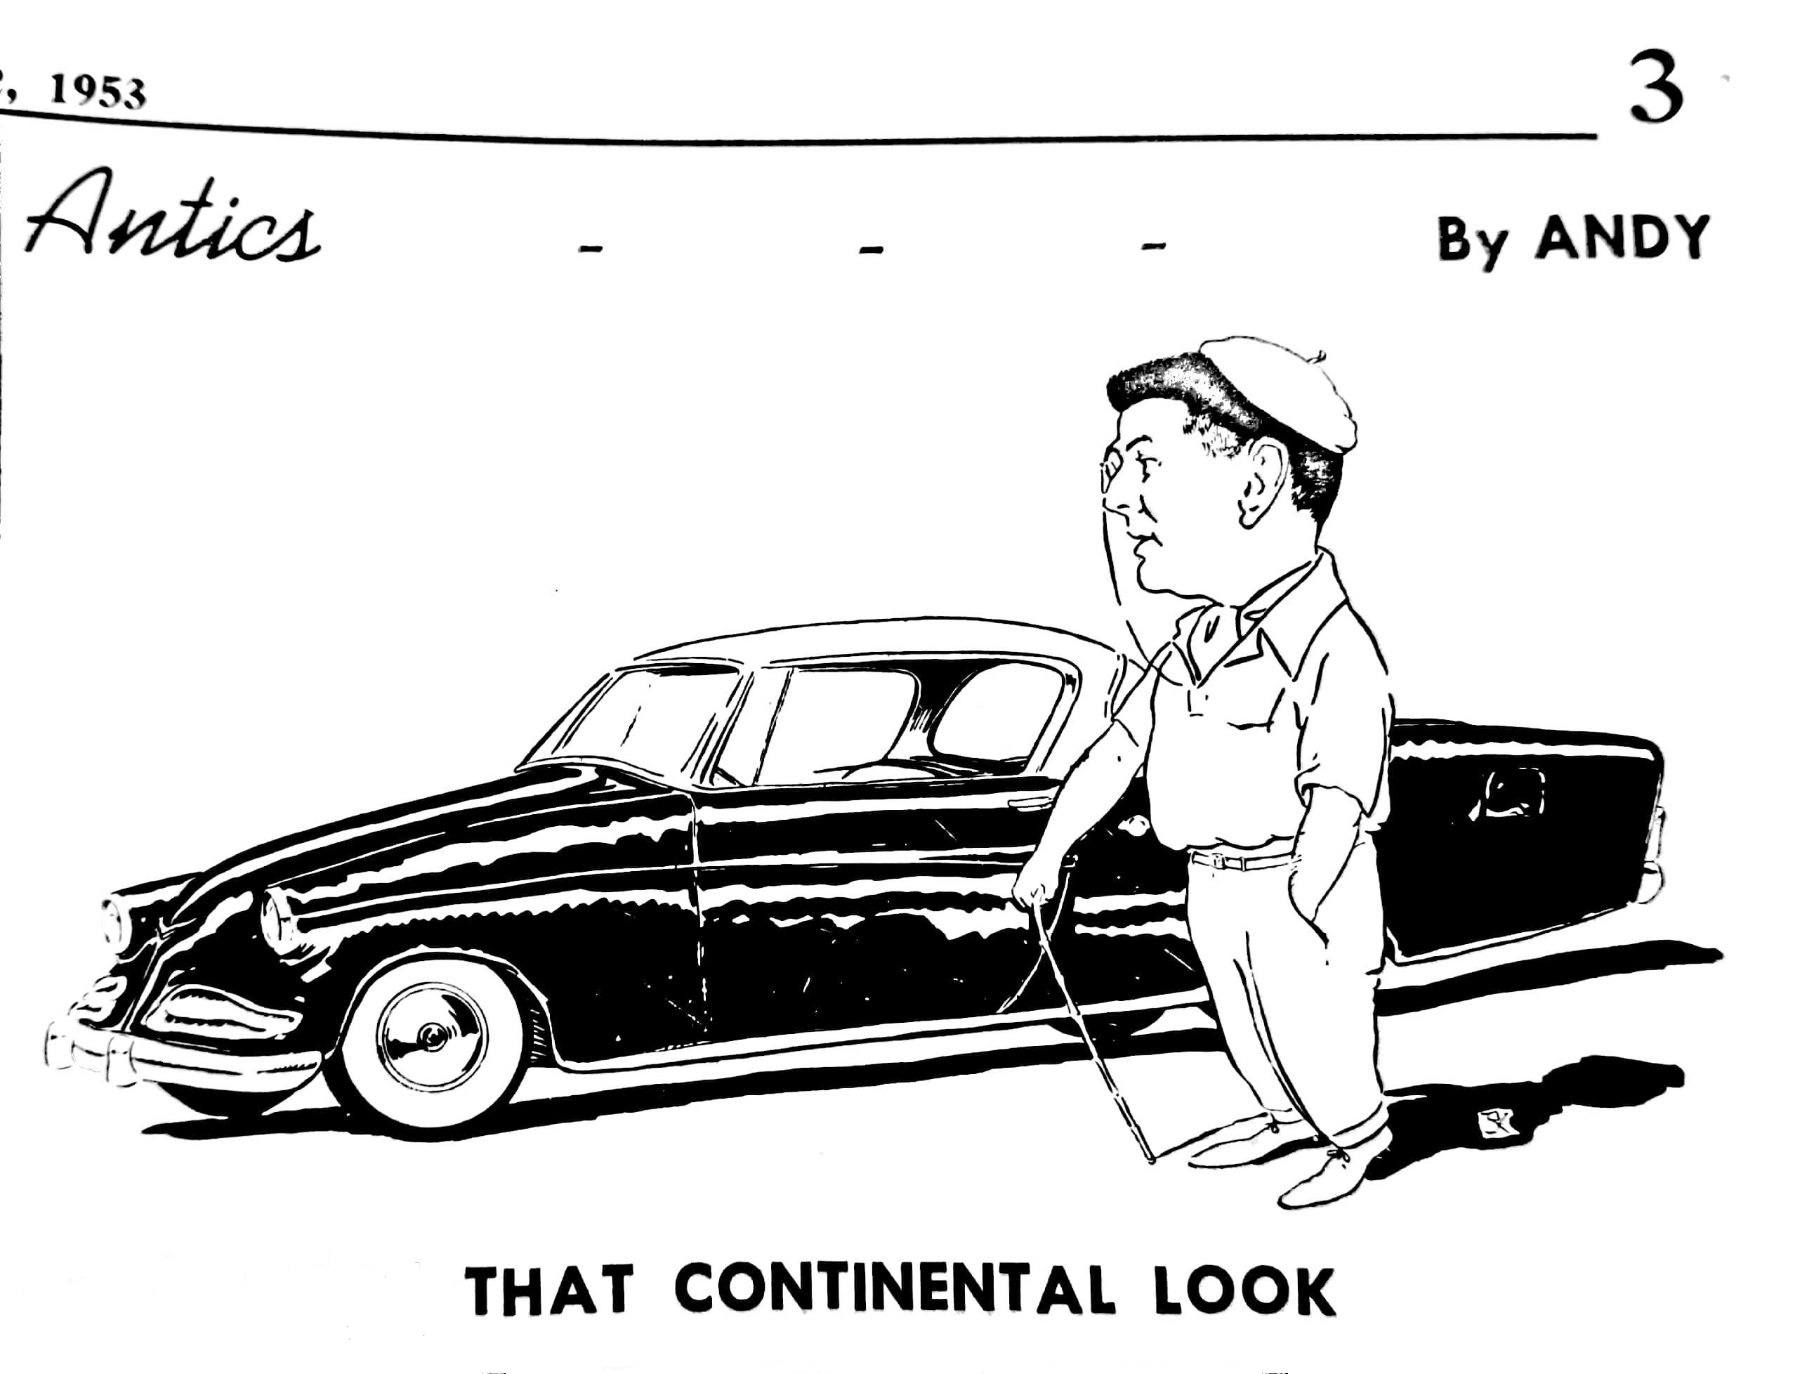 [That Continental Look]